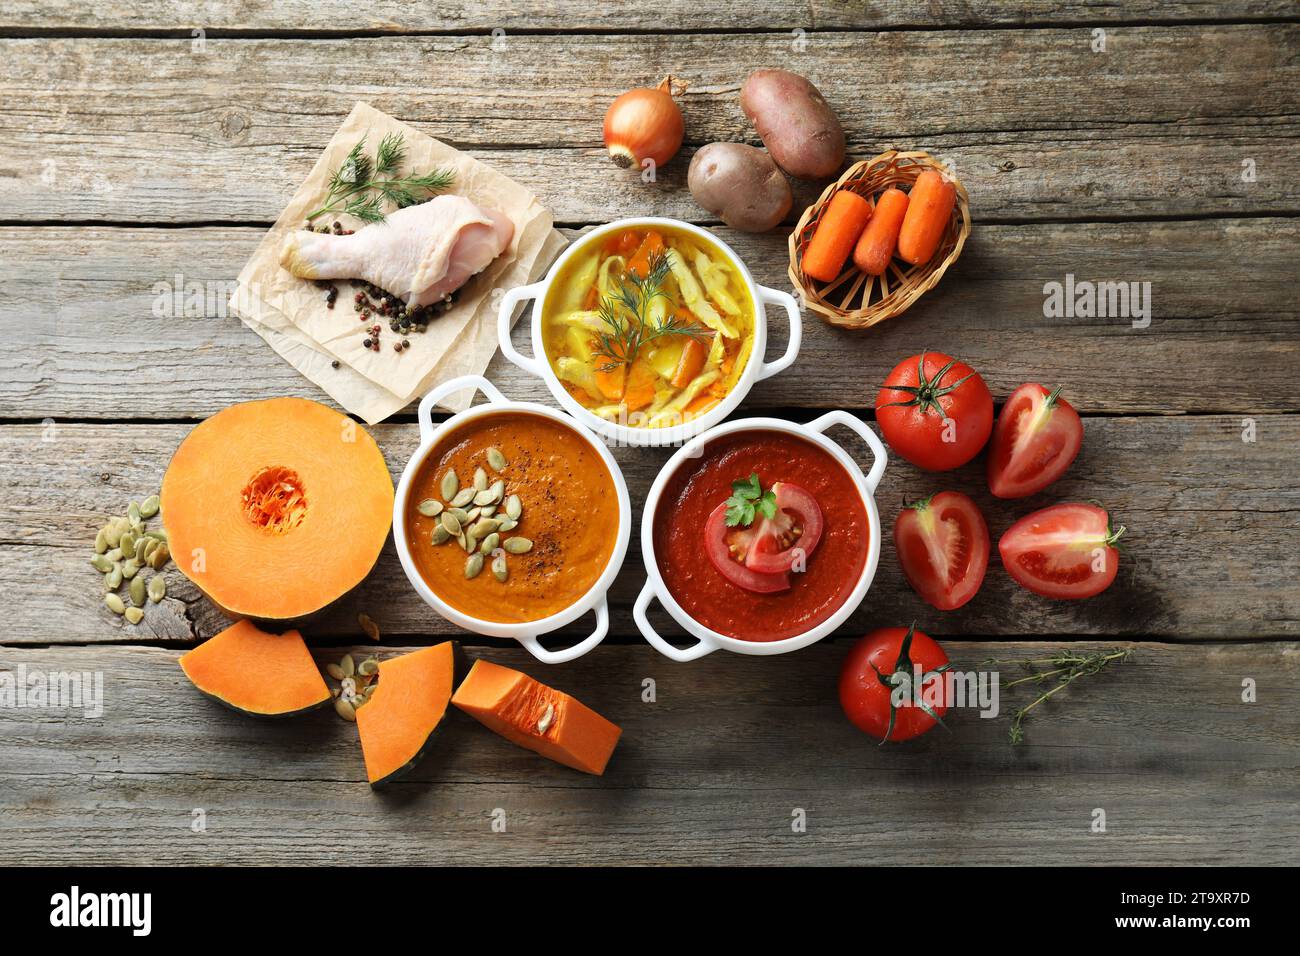 https://c8.alamy.com/comp/2T9XR7D/tasty-broth-cream-soups-in-bowls-and-ingredients-on-old-wooden-table-2T9XR7D.jpg